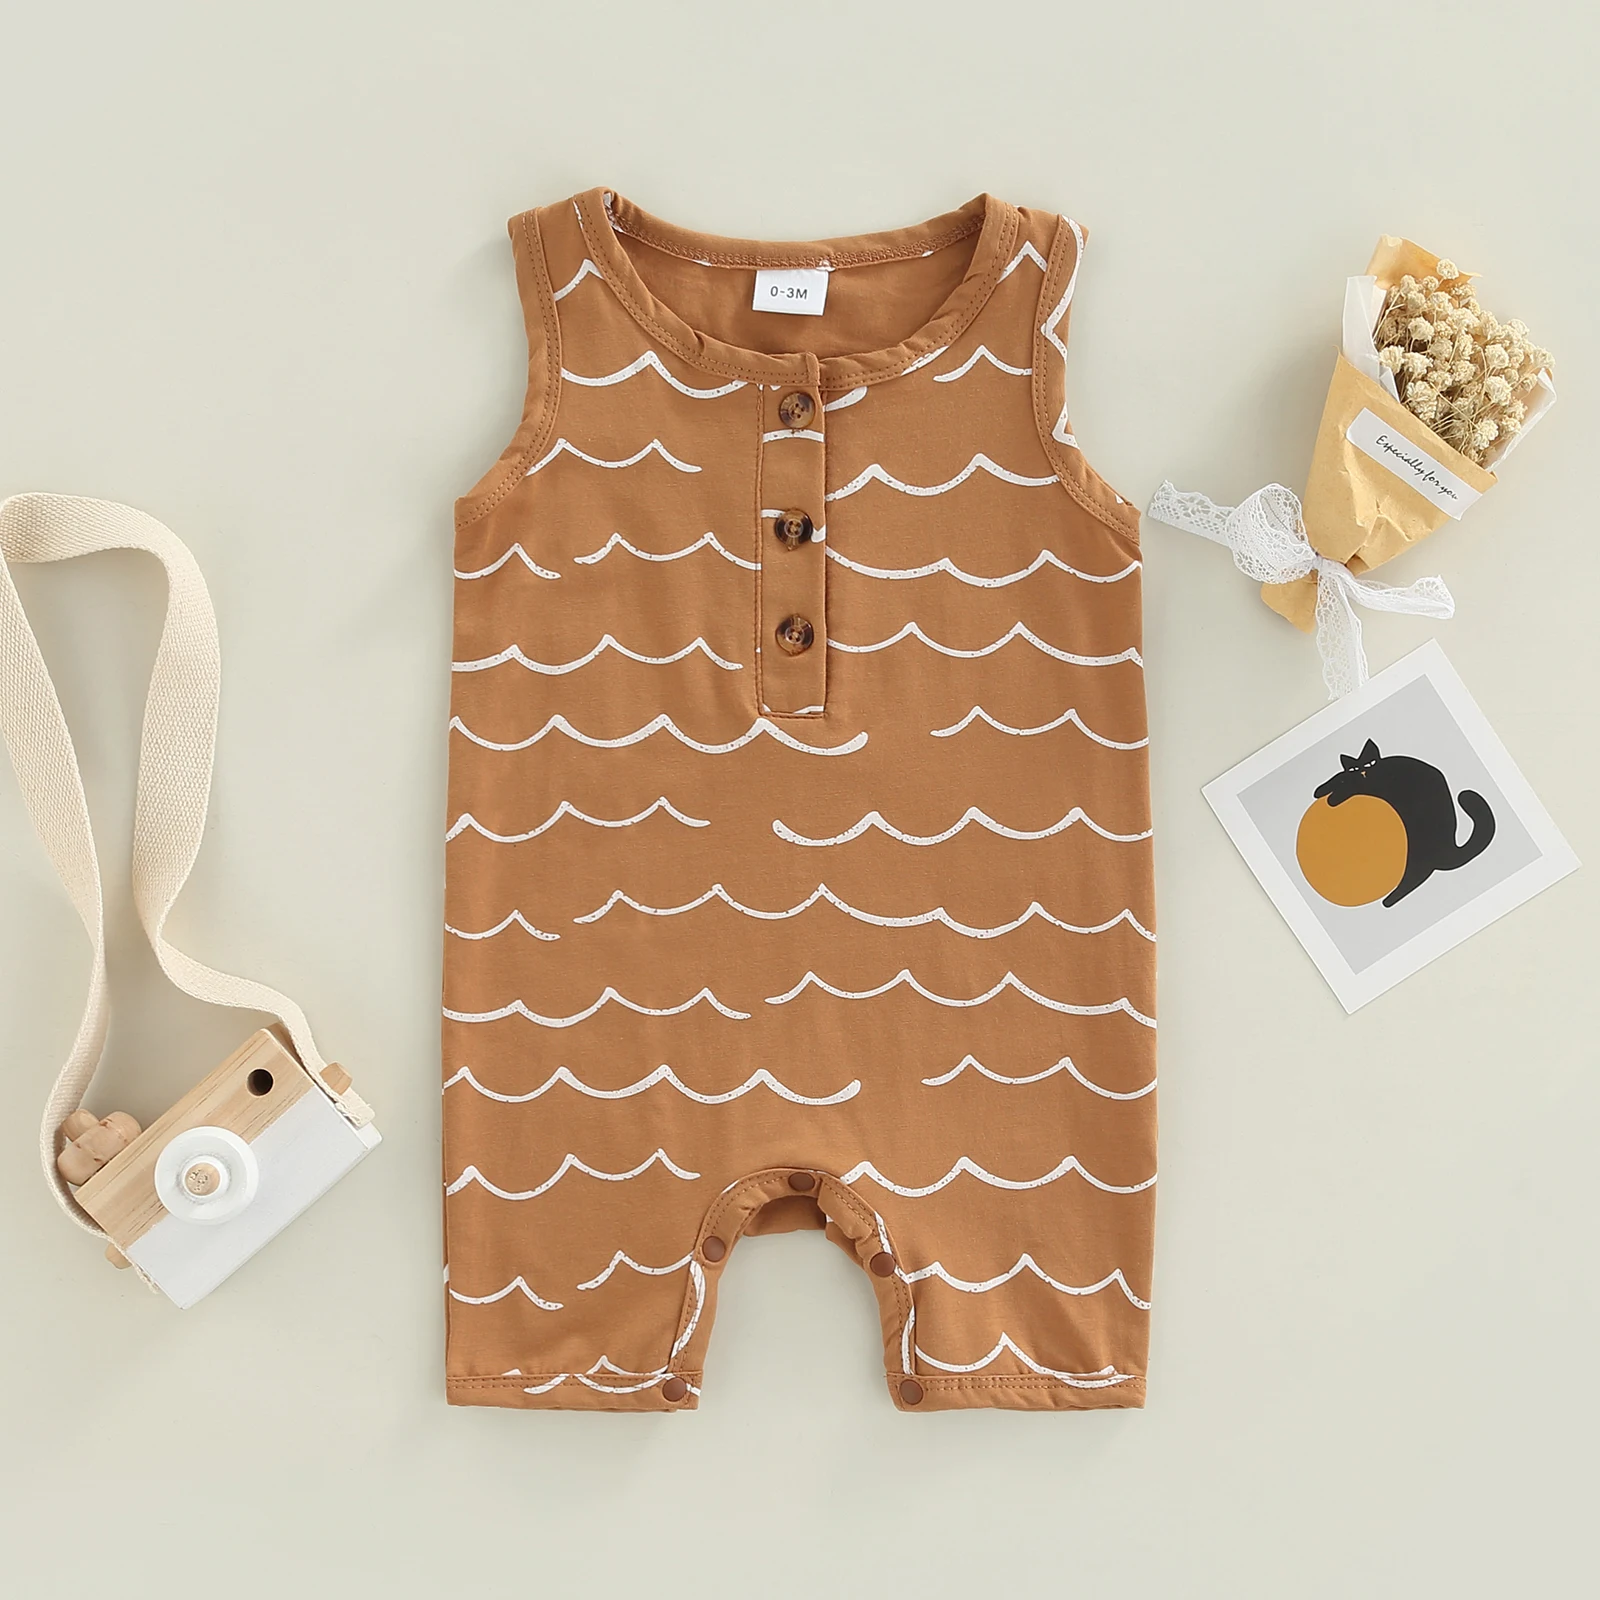 2022-03-01 Lioraitiin 0-12M Infant Baby Boy Girl Casual Romper Summer Sleeveless Printting O-Neck Snap Crotch Jumpsuit customised baby bodysuits